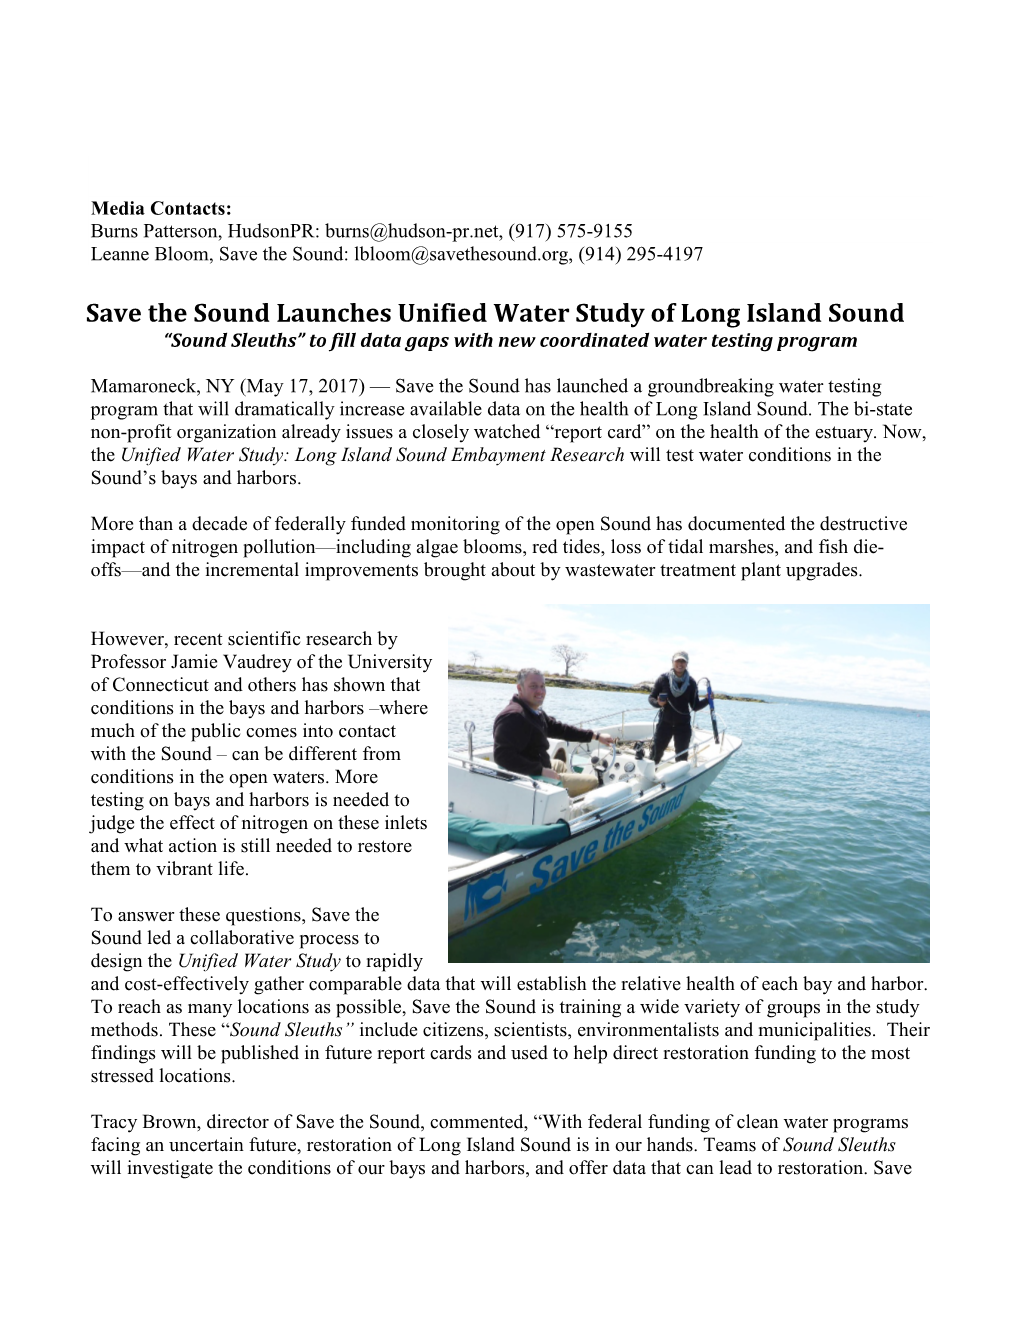 Save the Sound Launches Unified Water Study of Long Island Sound “Sound Sleuths” to Fill Data Gaps with New Coordinated Water Testing Program